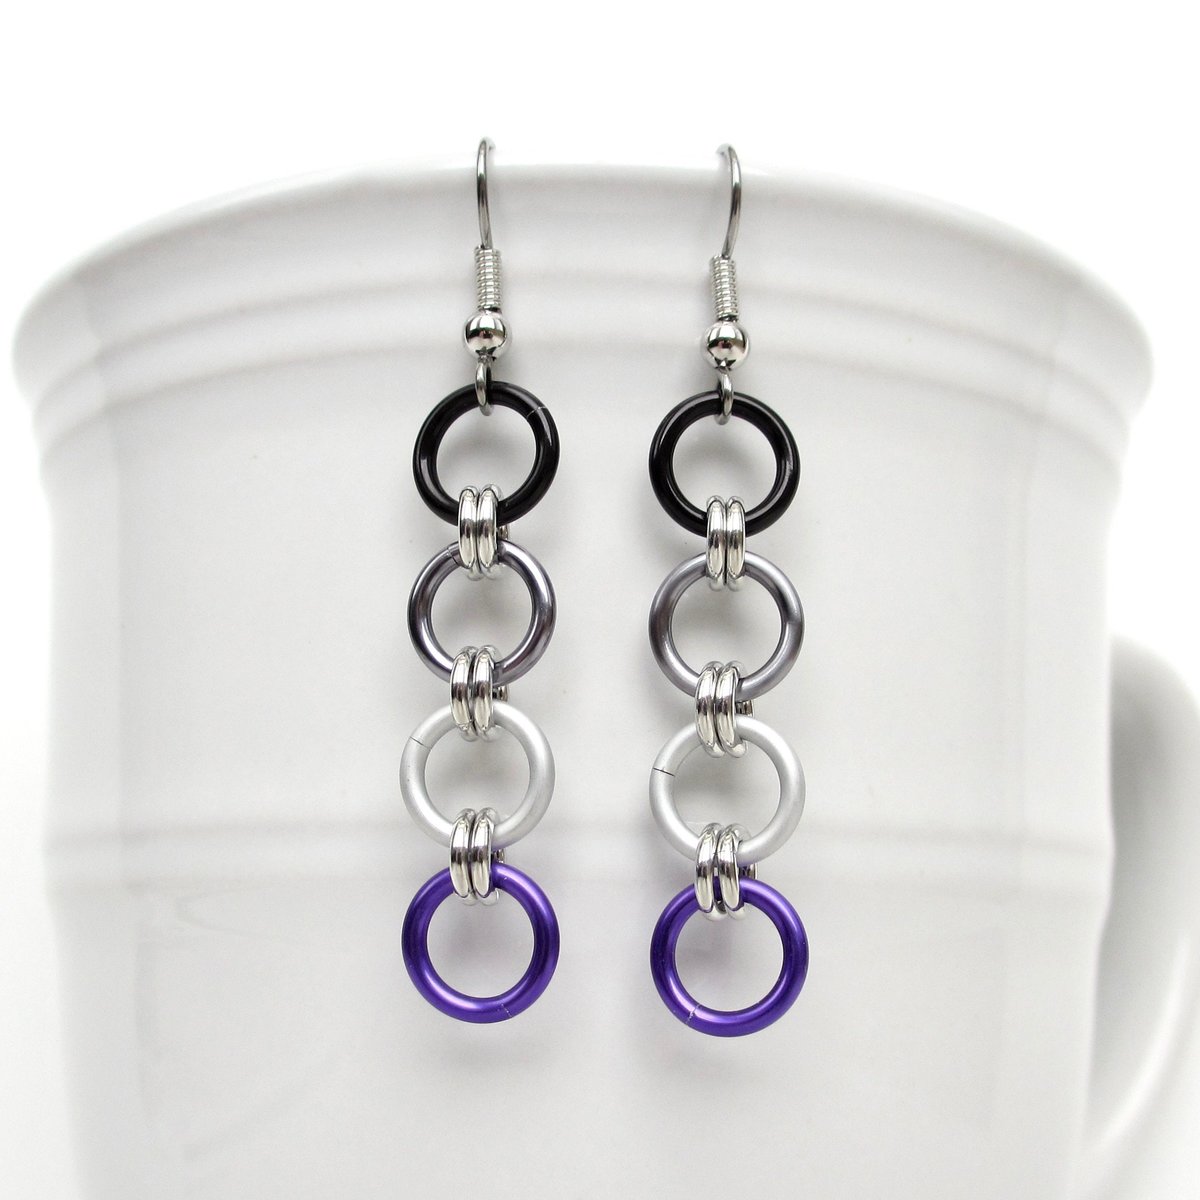 Asexual pride flag earrings, simple chain LGBTQ chainmail jewelry